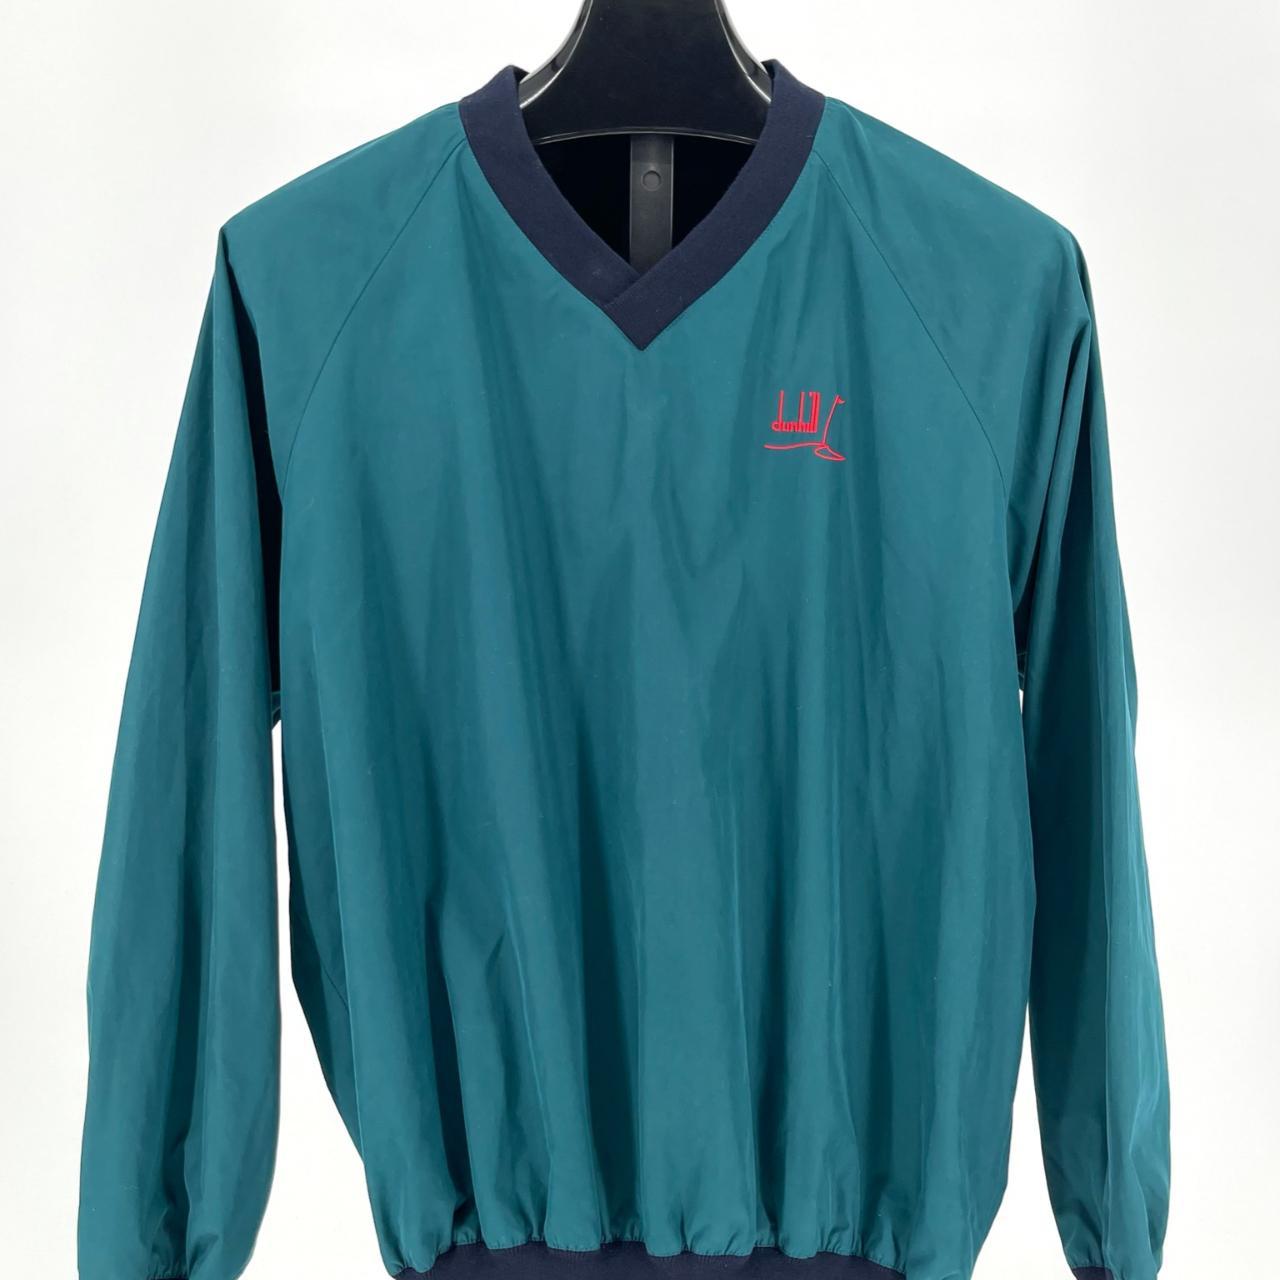 Dunhill Men's Blue and Green Jumper